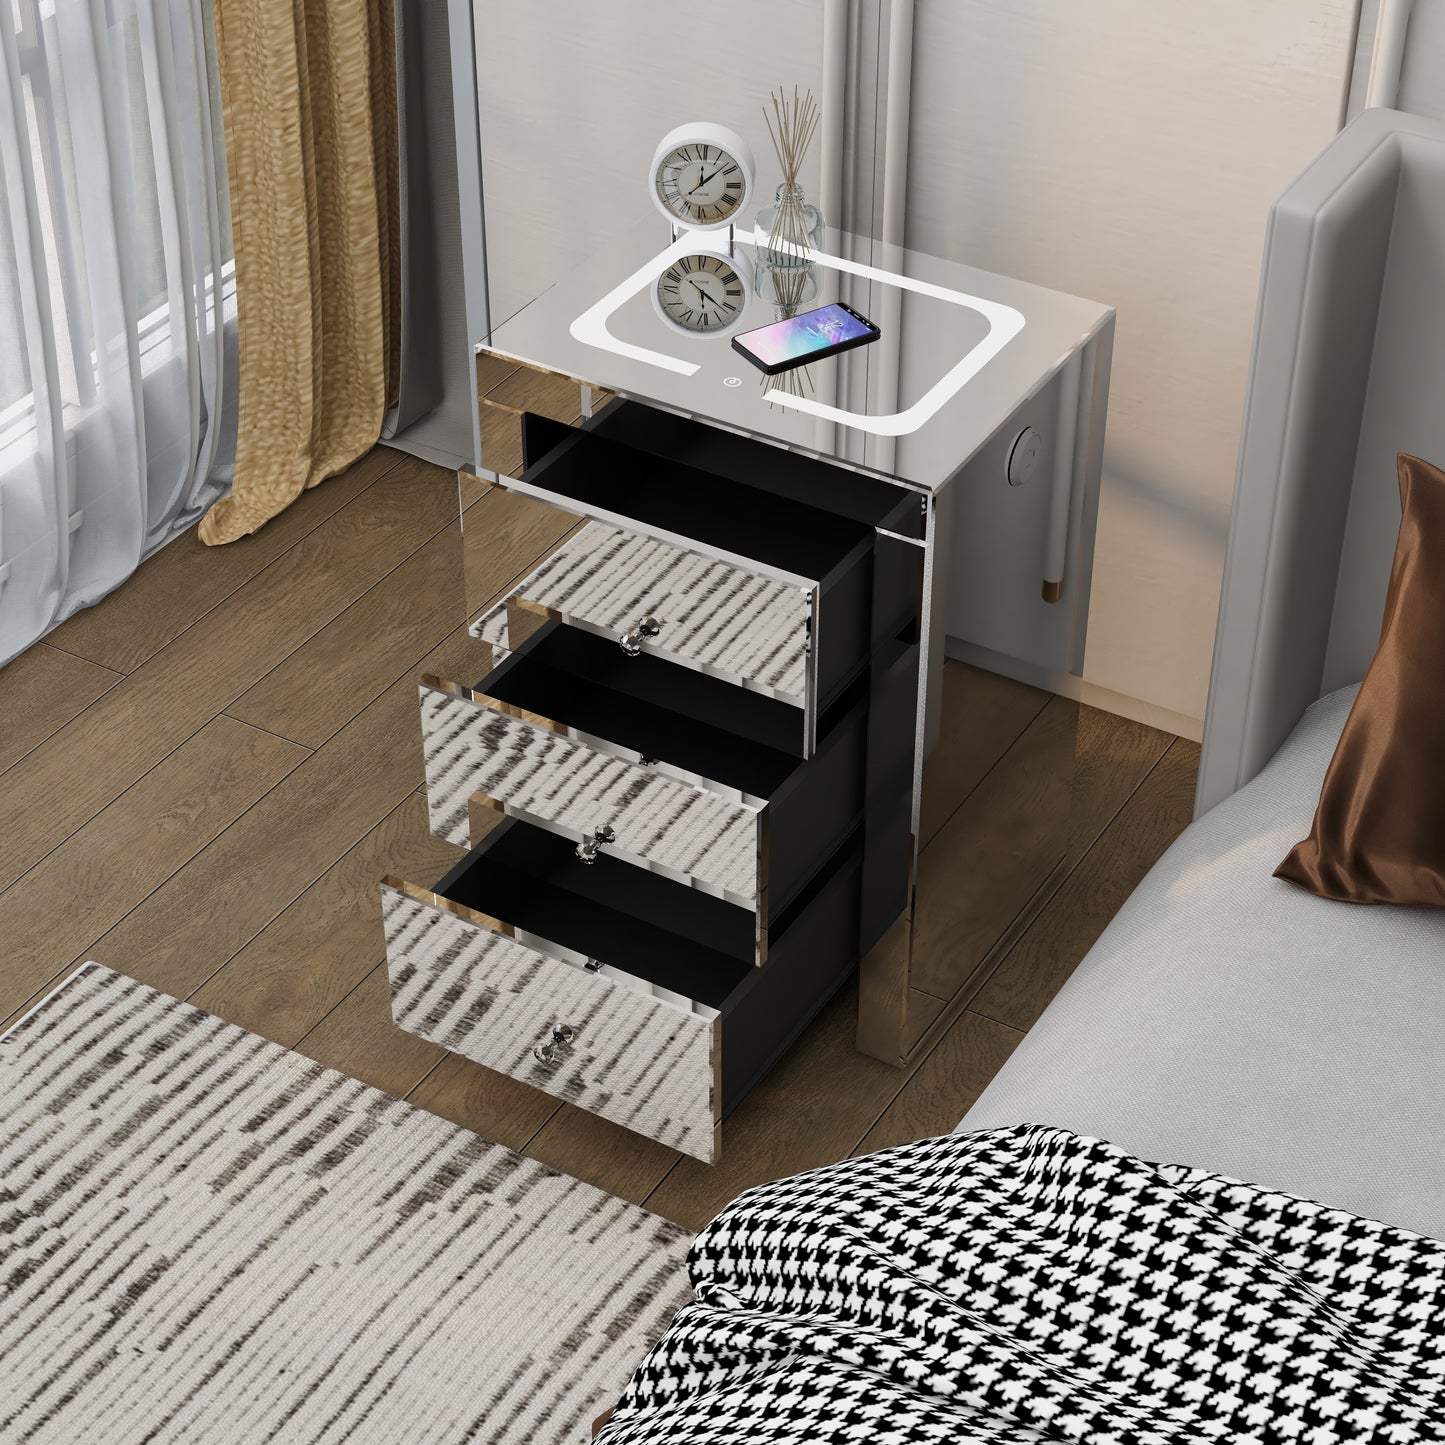 Silver glass nightstand for living room, shining bedside table with wireless charging and charging ports